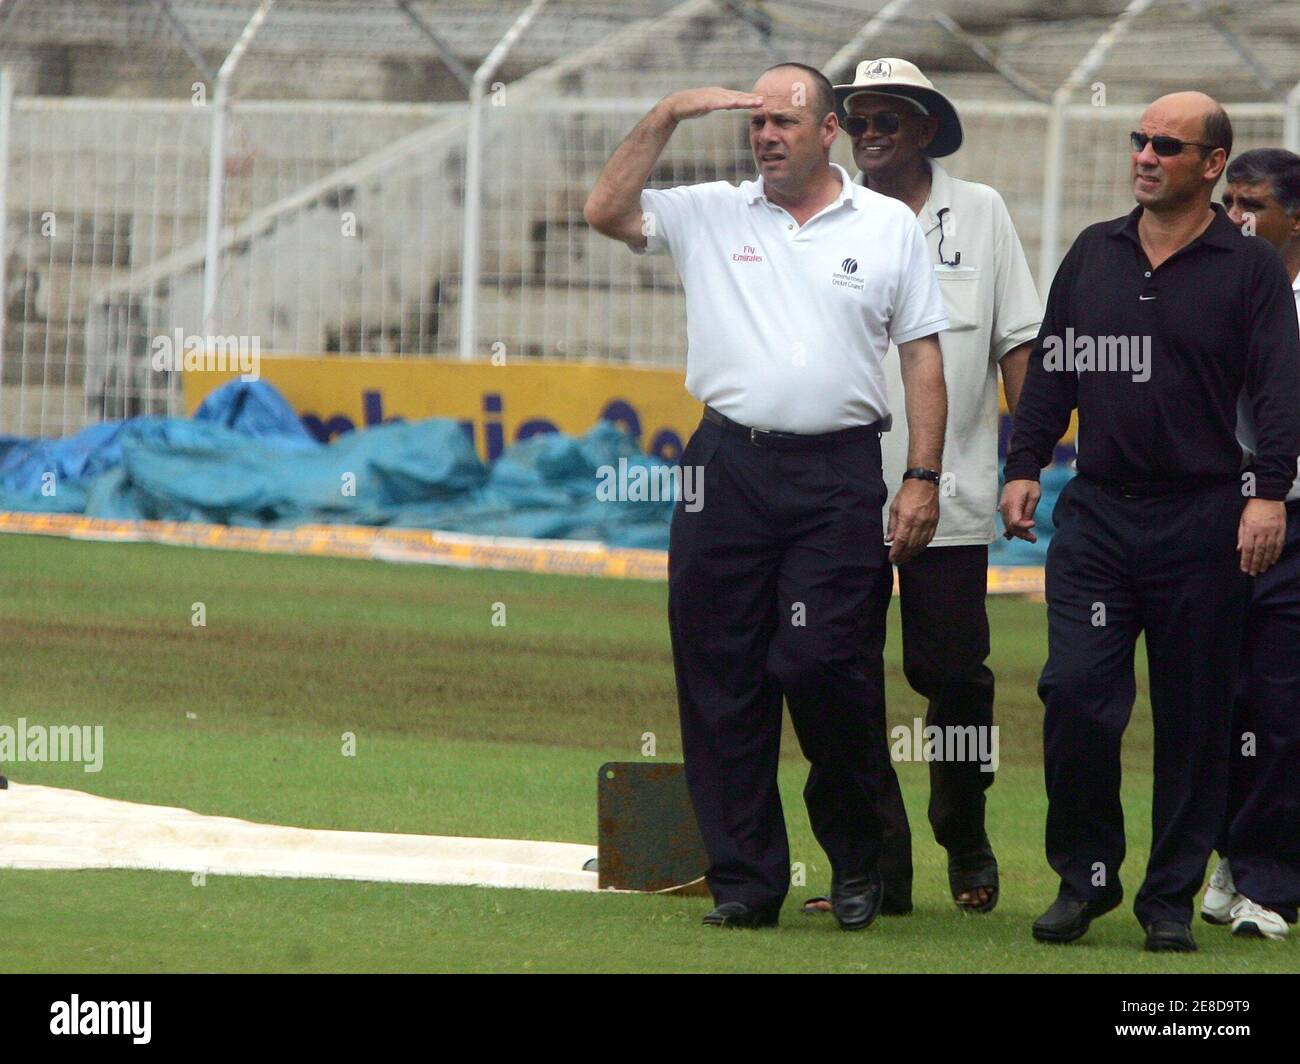 Umpires Daryl Harper (L) and Mark Benson (R) accompanied by Indian groundsmen inspect the ground at the M.A.Chidambram stadium in Chennai December 3, 2005. The second day's play of the first test match between India and Sri Lanka was called off due to wet ground conditions caused by rains. India and Sri Lanka will play a three test match series. REUTERS/Arko Datta Stock Photo